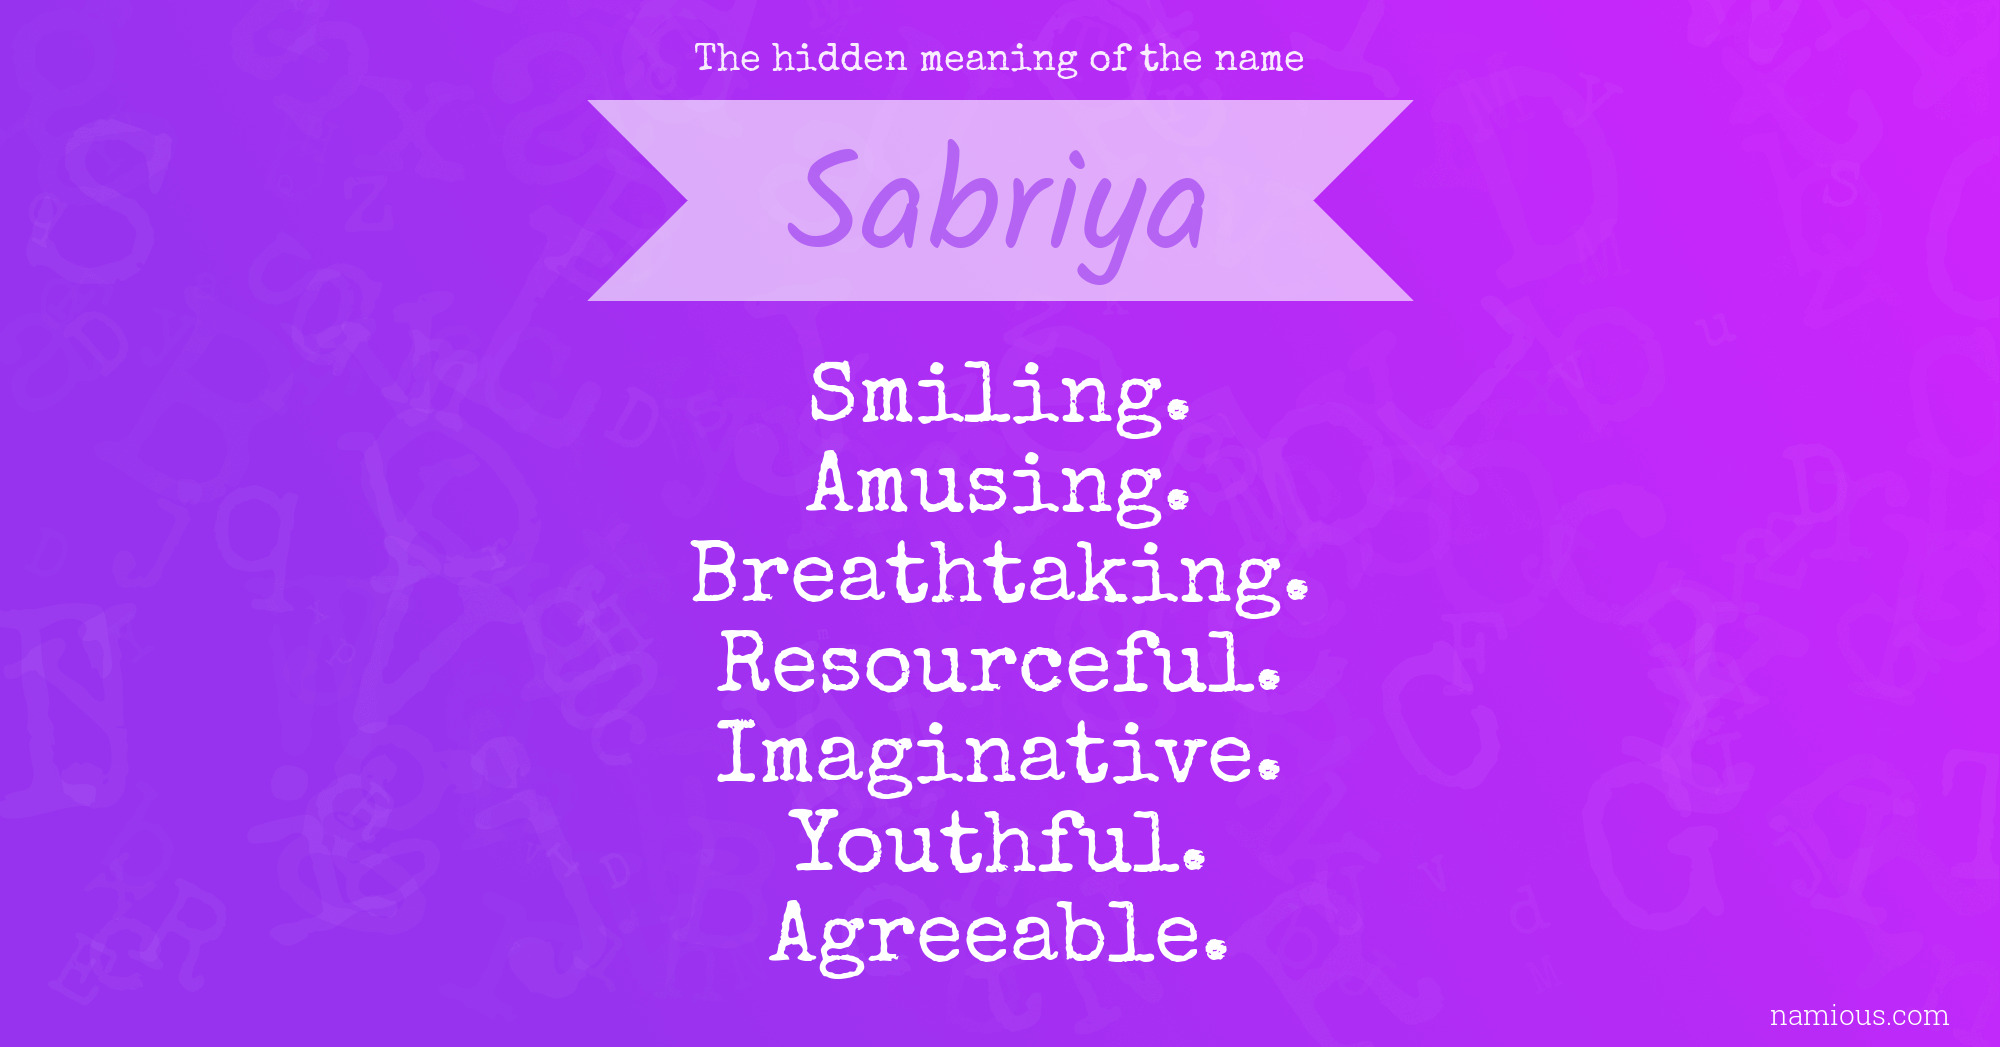 The hidden meaning of the name Sabriya